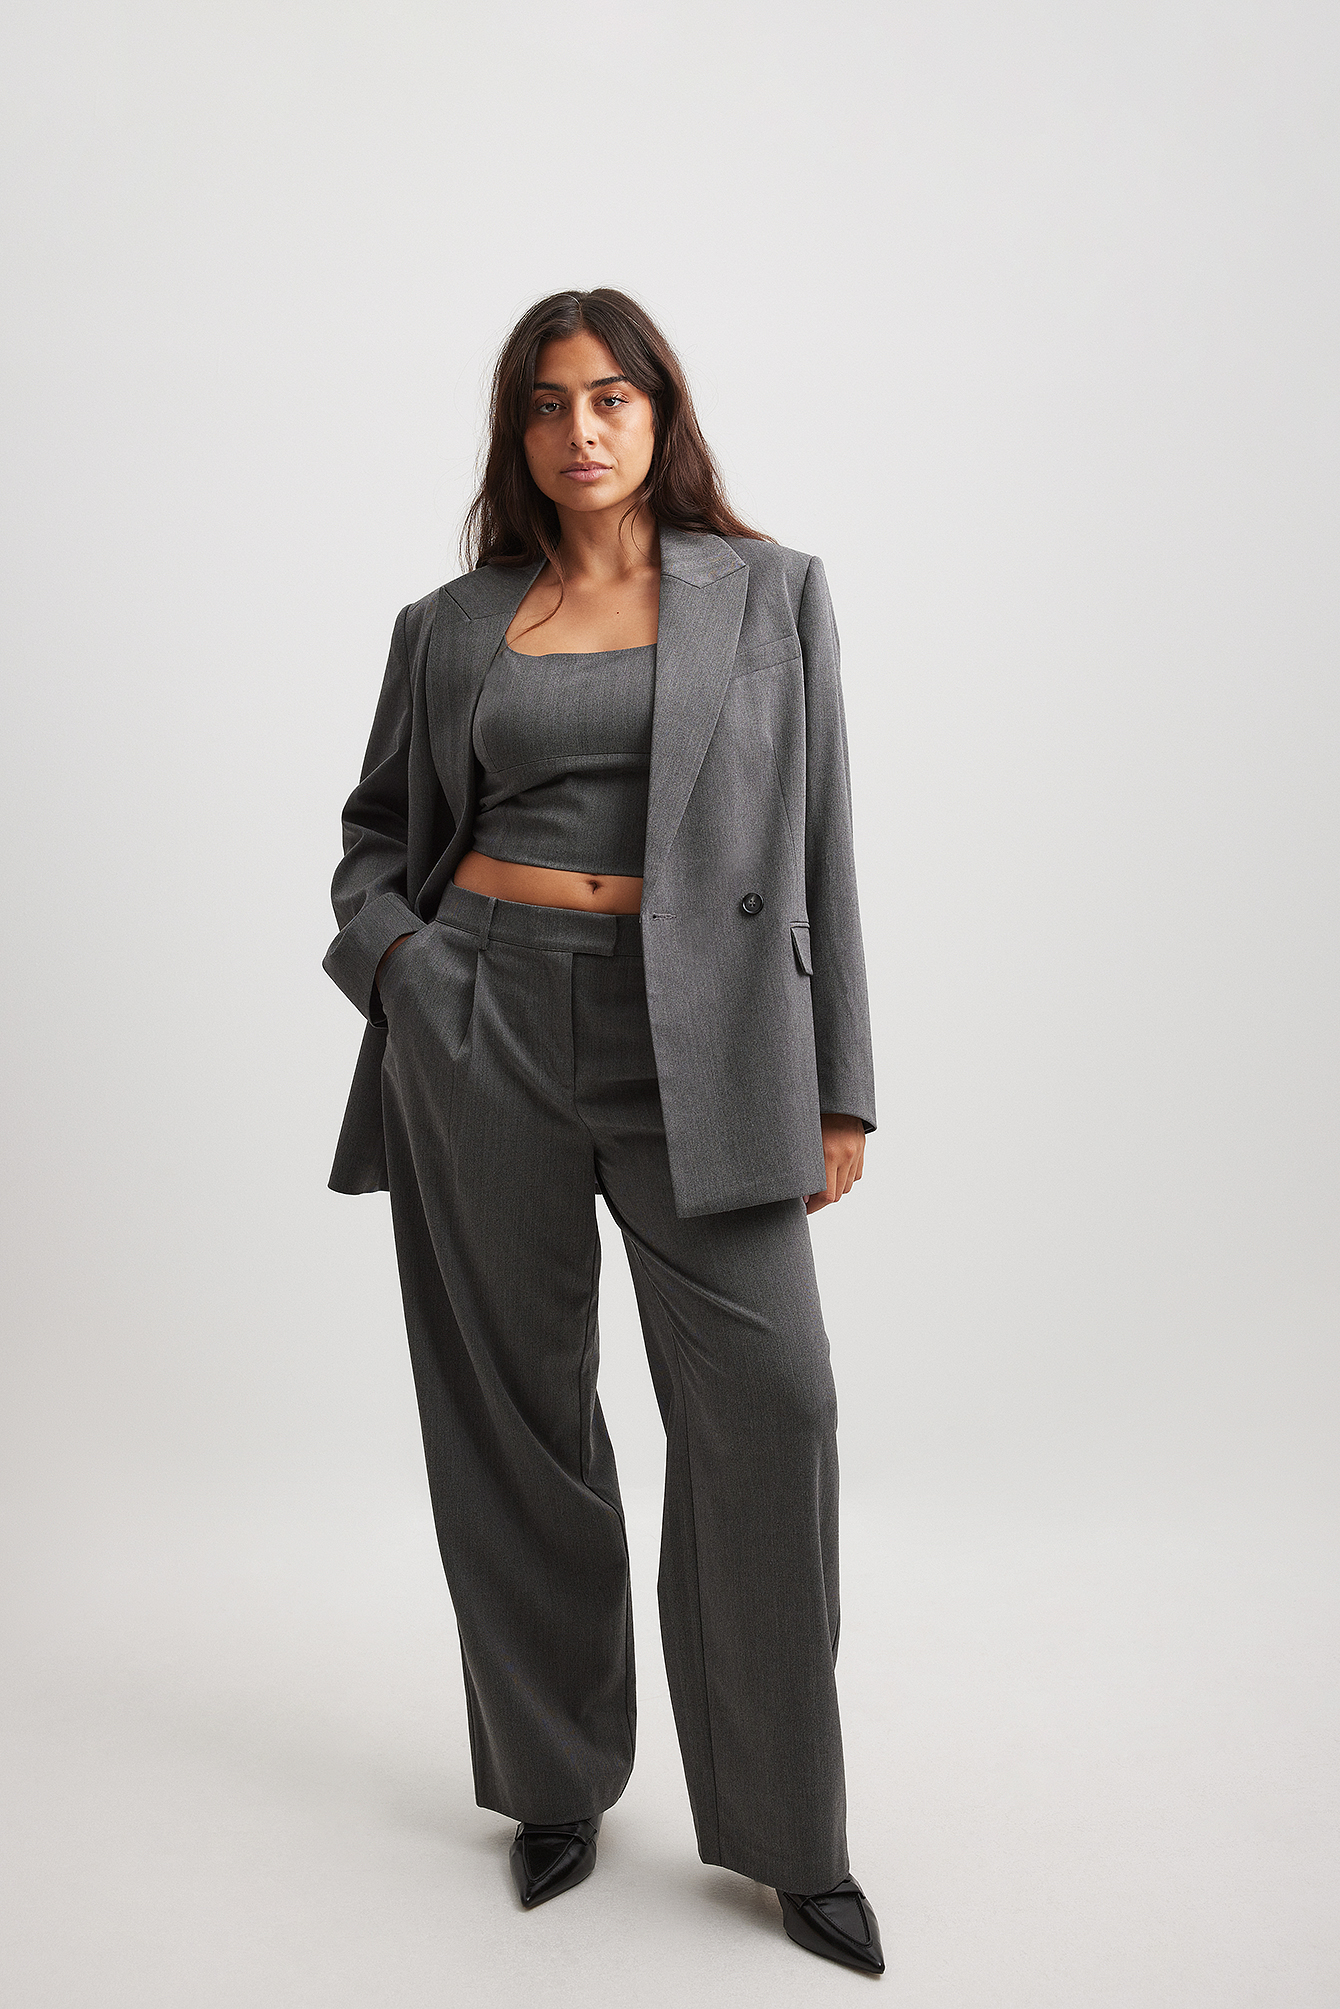 ASOS DESIGN extreme wide leg suit trousers in navy crepe | ASOS